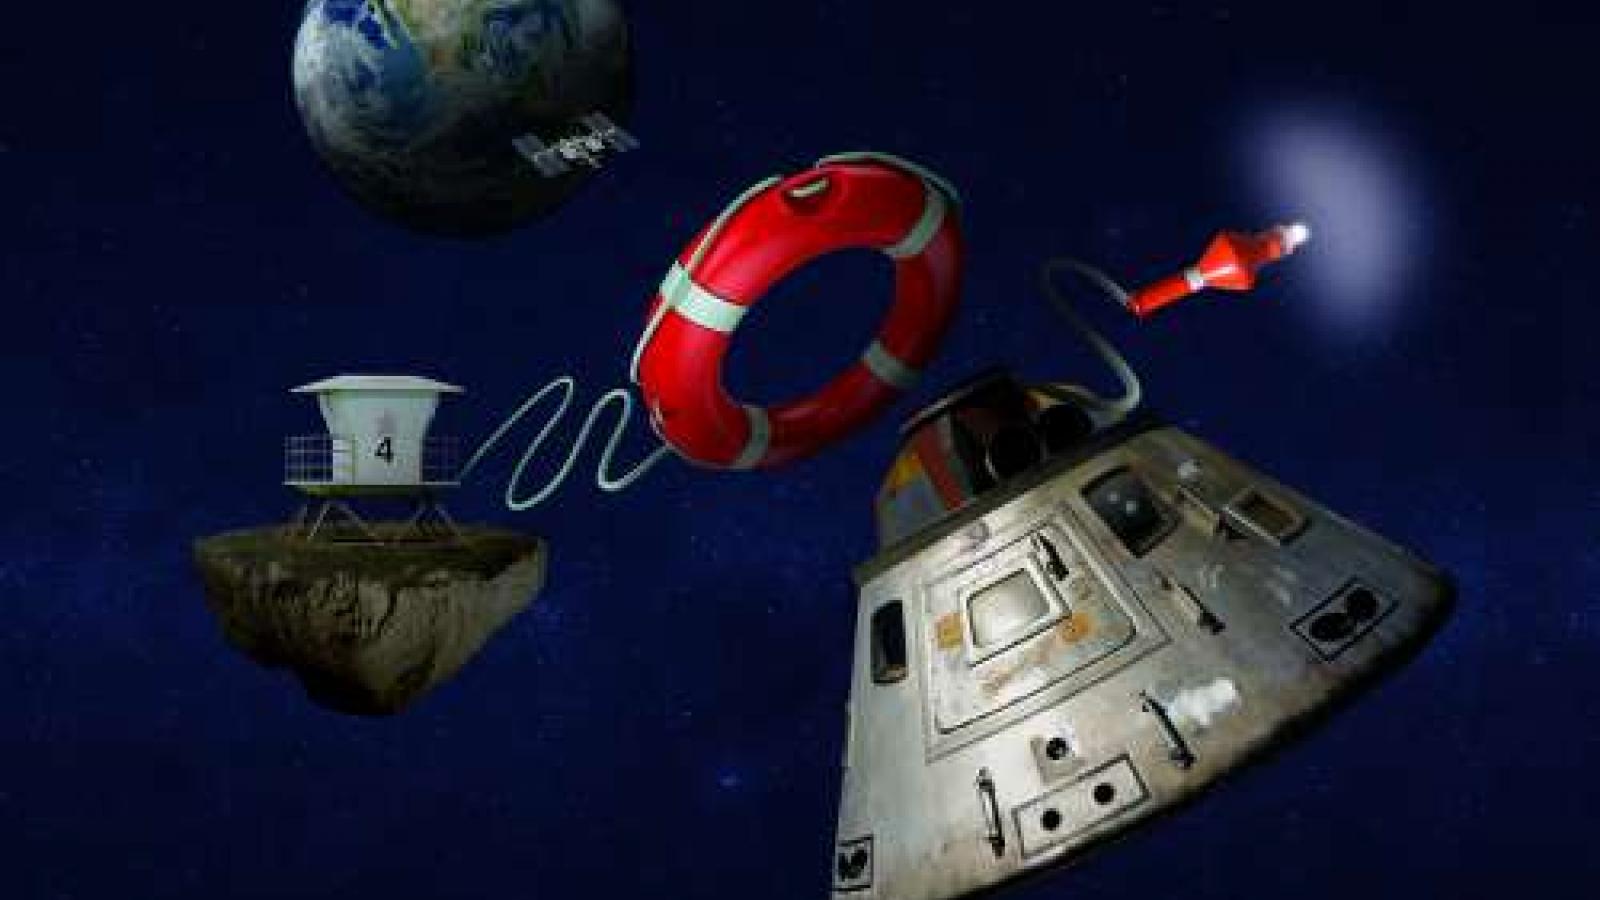 The In-Space Rescue Capability Gap